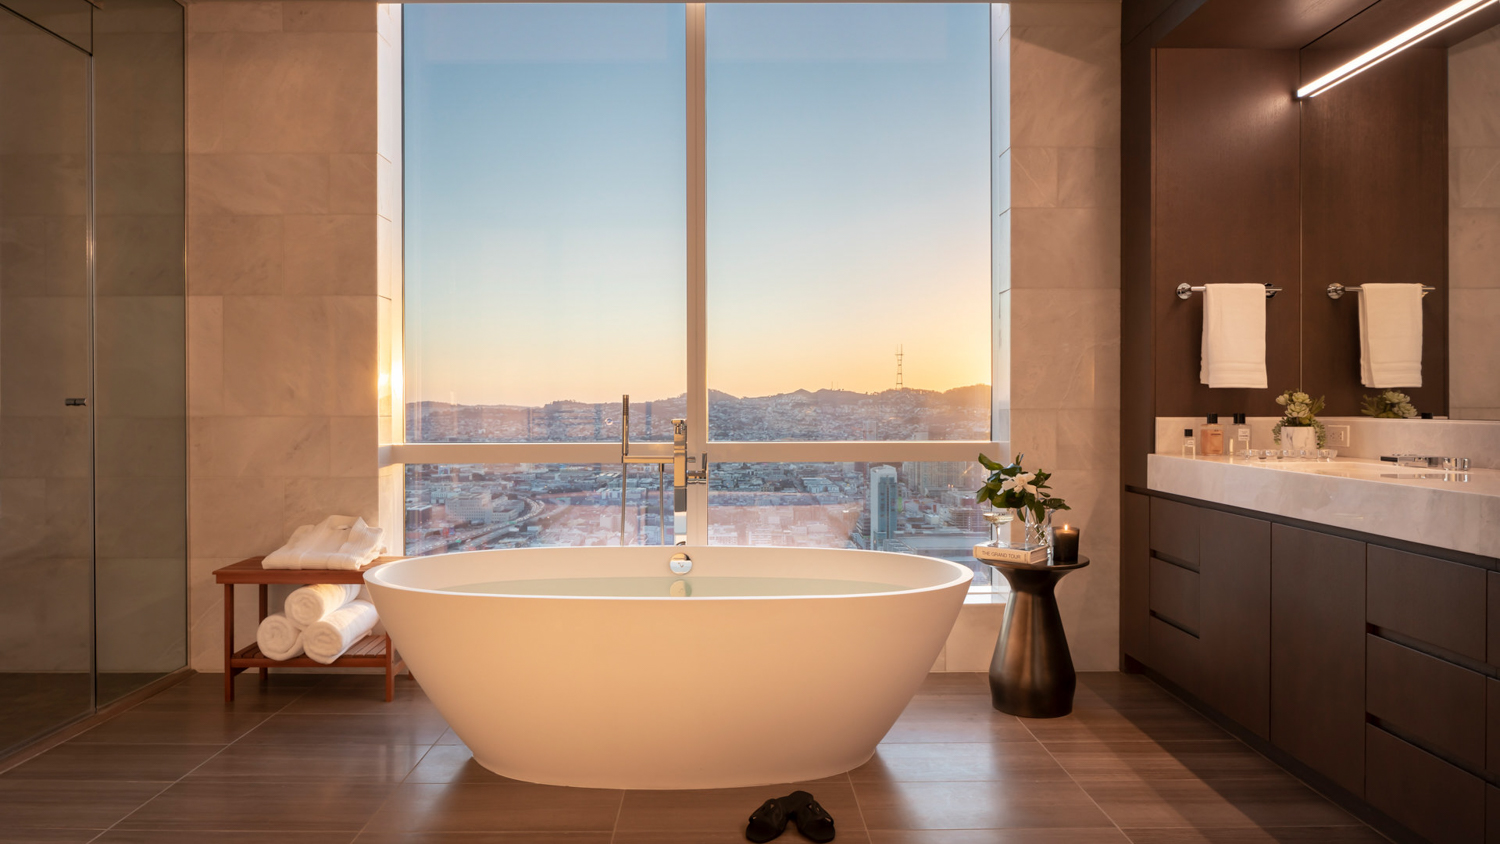 The Avery penthouse bathroom, design by OMA